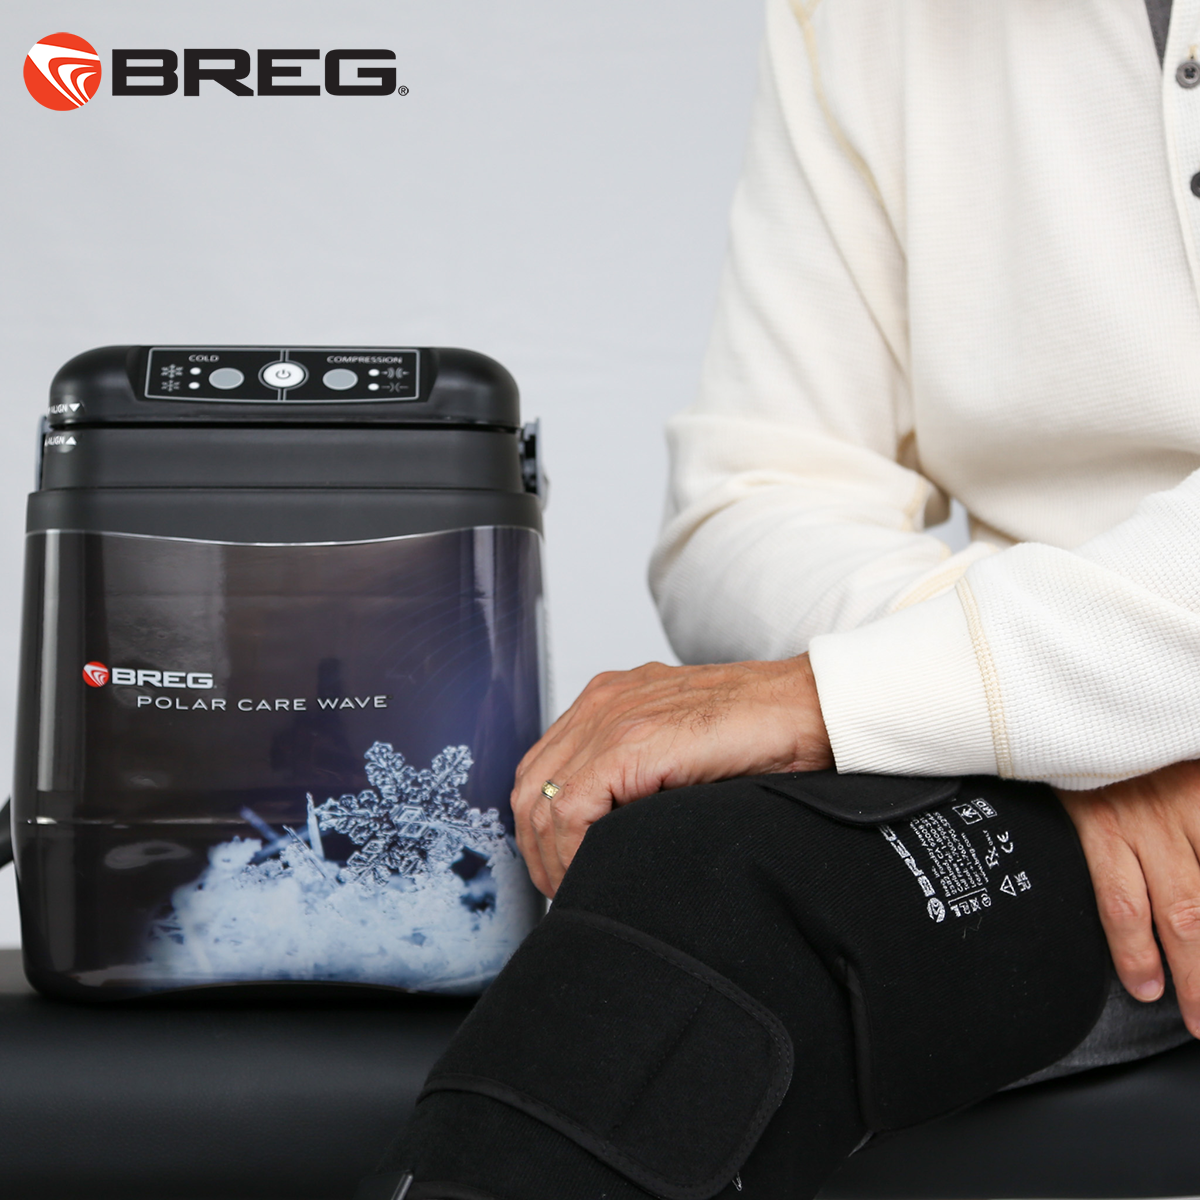 Breg® Polar Care Wave w/ Cold Compression Foot/Ankle Pad